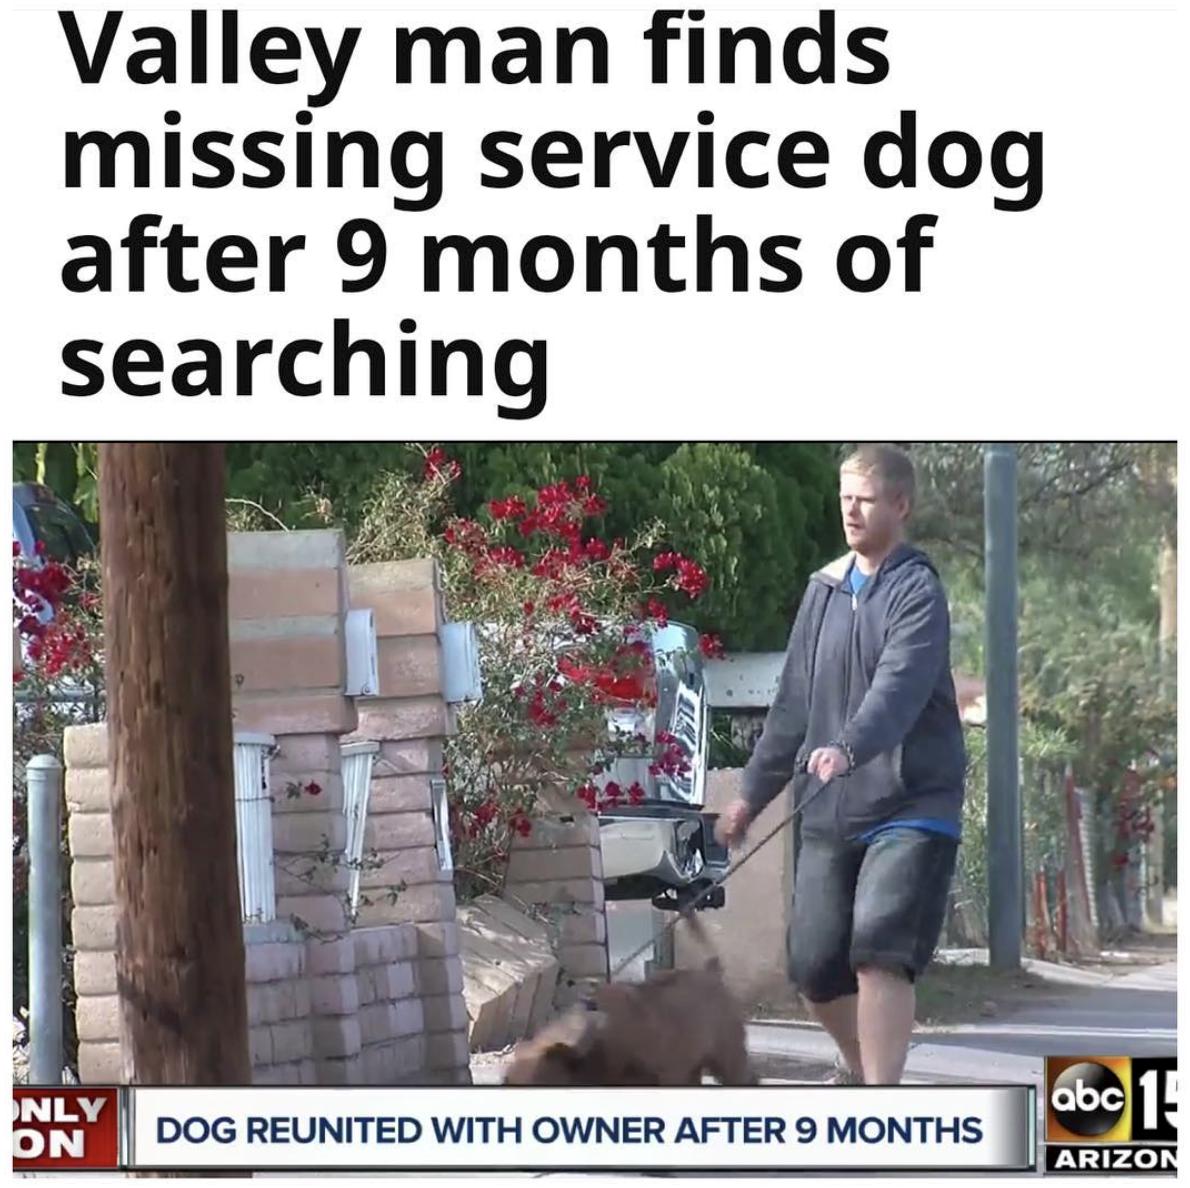 tree - Valley man finds missing service dog after 9 months of searching Nly abc 1 Dog Reunited With Owner After 9 Months On Arizon